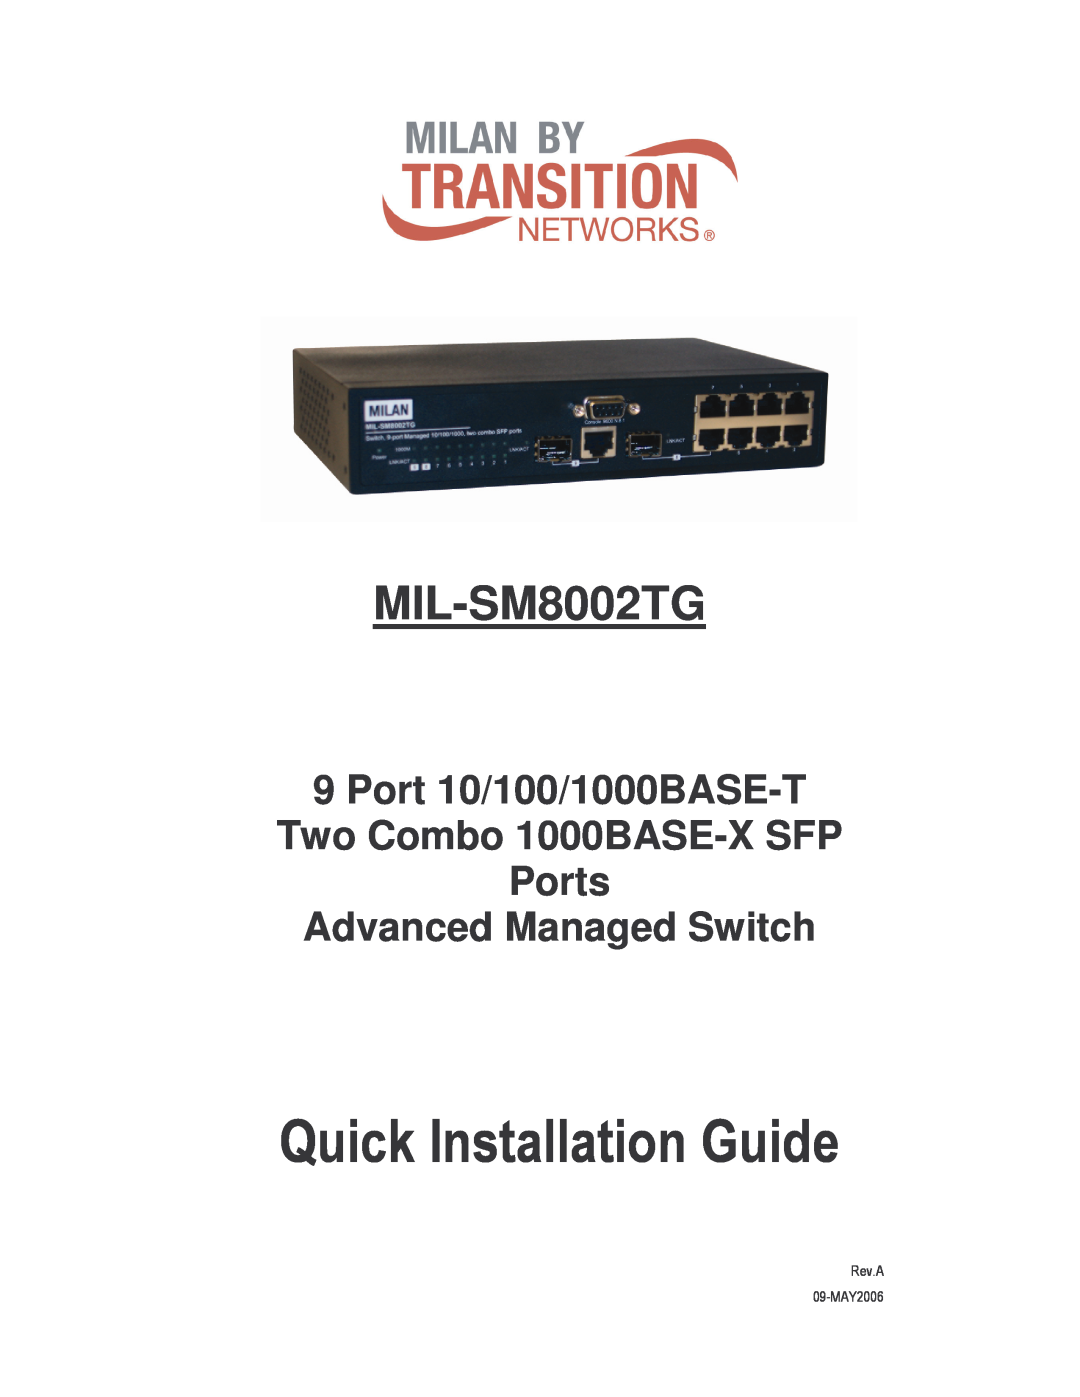 Transition Networks MIL-SM8002TG manual Quick Installation Guide, Port 10/100/1000BASE-T Two Combo 1000BASE-X SFP Ports 